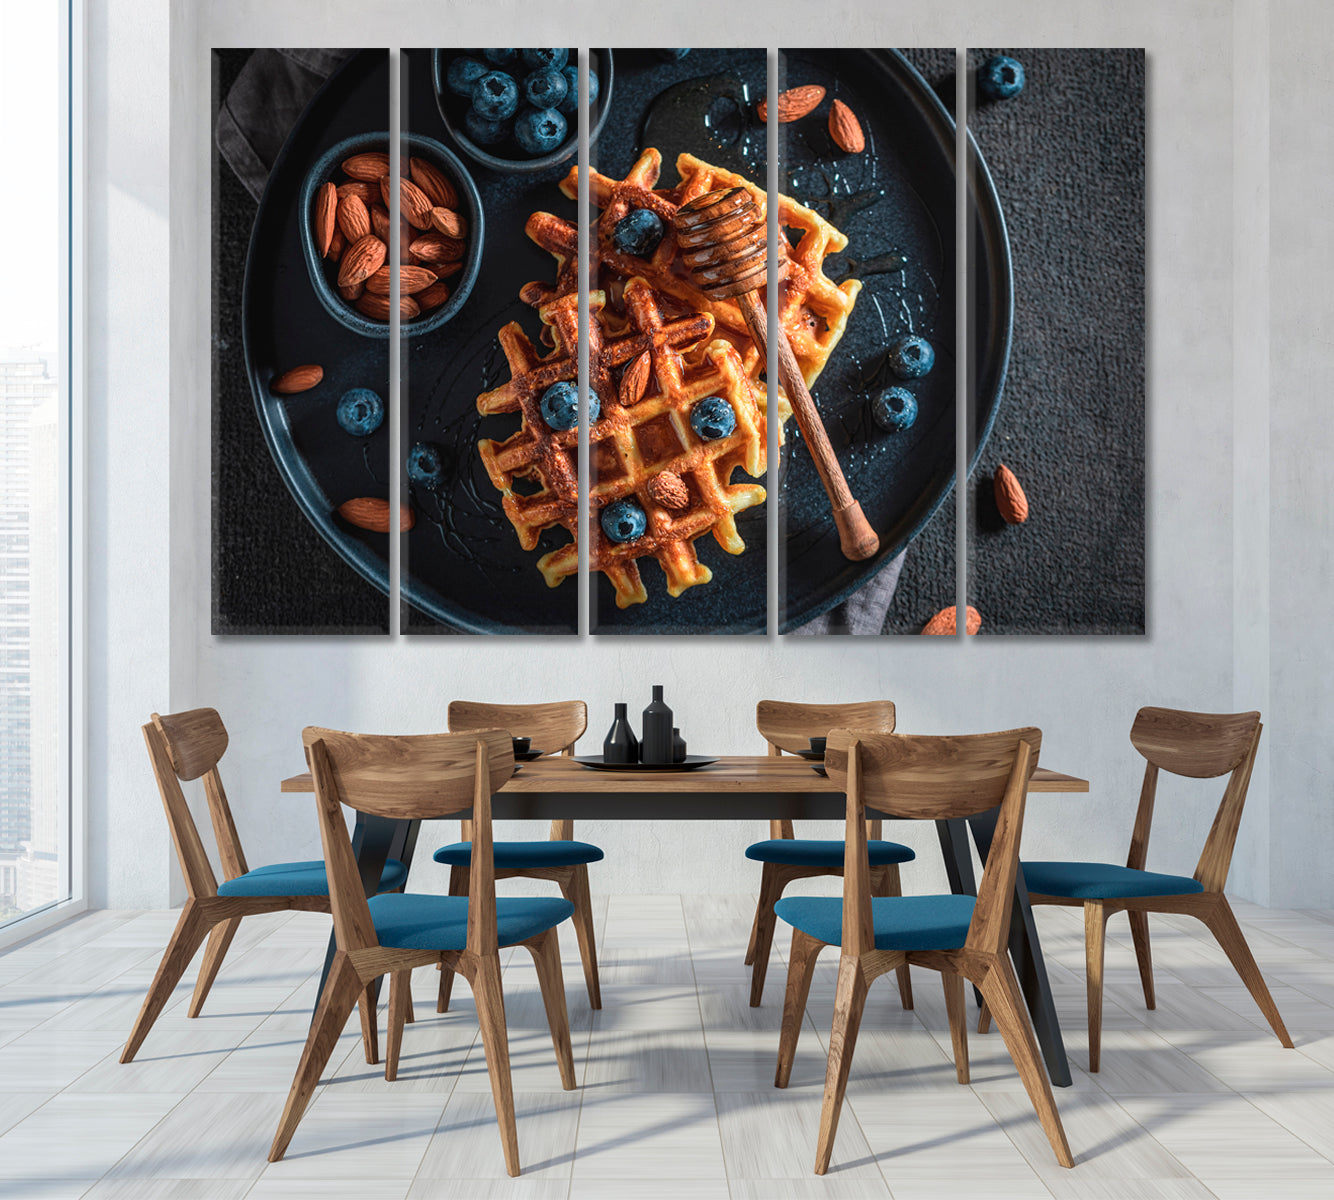 Belgian Waffles with Blueberries Honey and Almonds Canvas Print-Canvas Print-CetArt-1 Panel-24x16 inches-CetArt